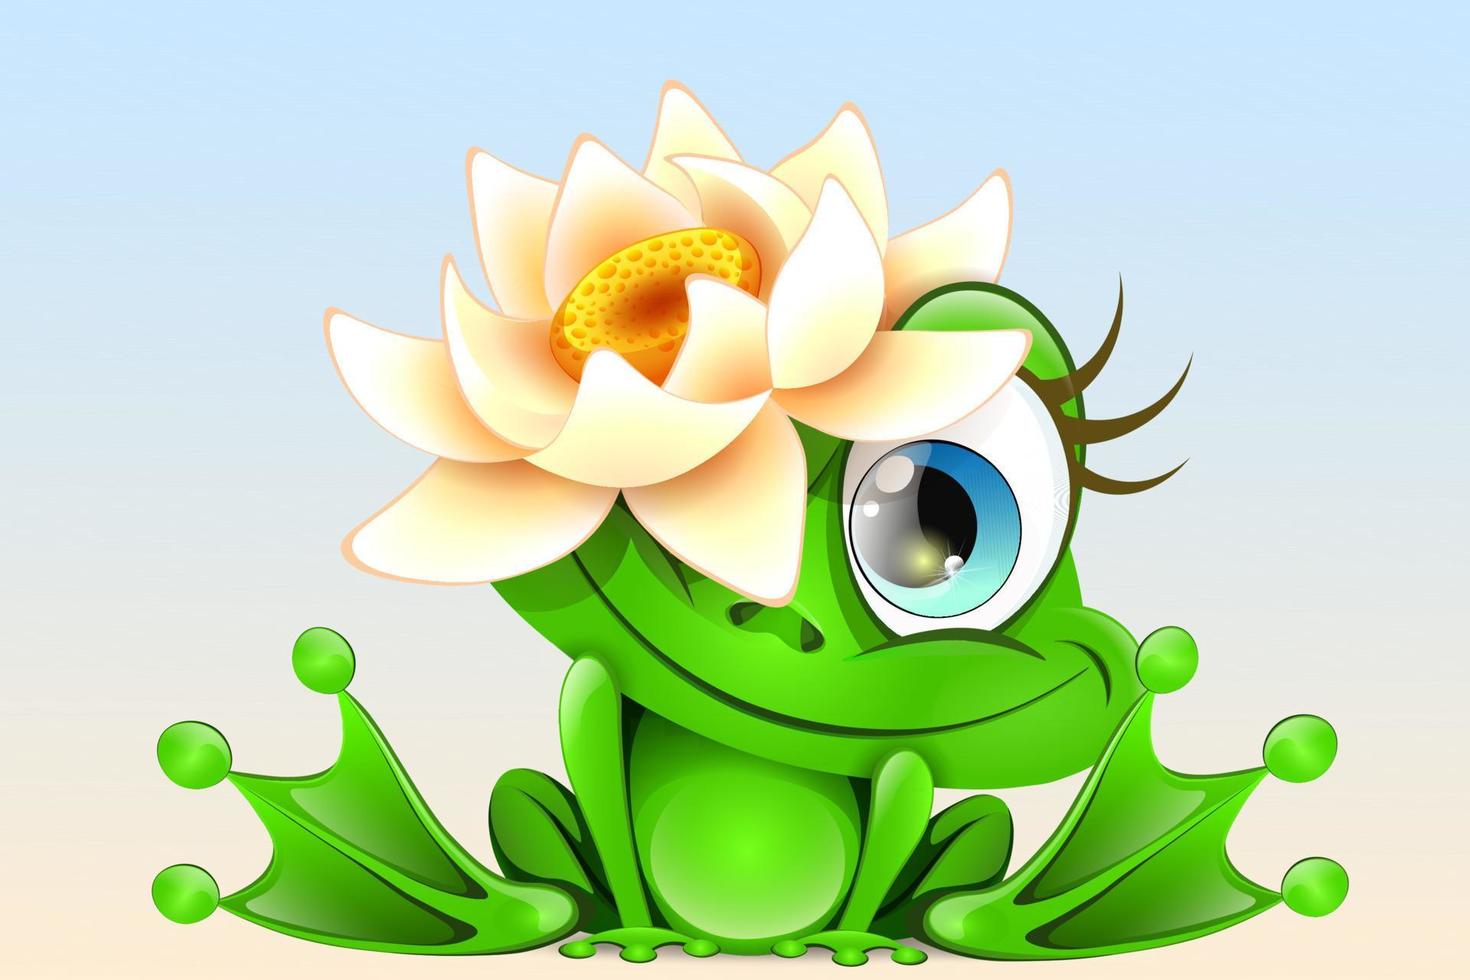 Frog with water lily vector